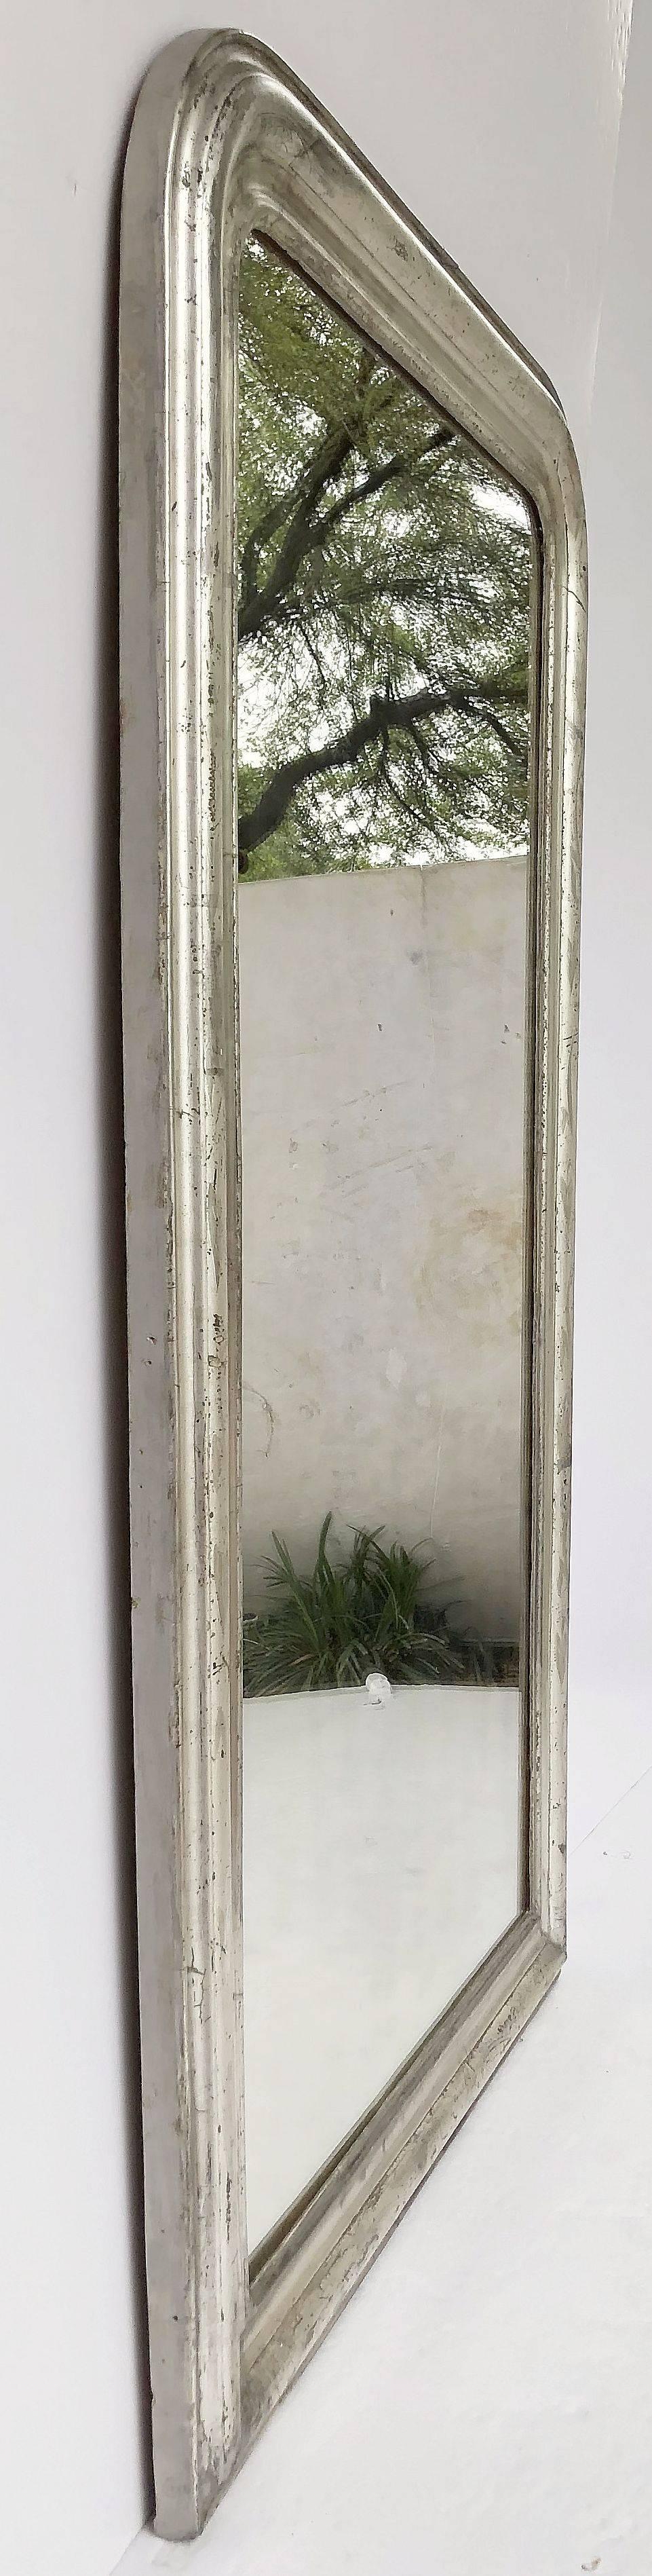 A fine large Louis Philippe wall mirror featuring a moulded surround with a beautiful patinated silver-leaf.

Dimensions: H 53 3/4 inches x W 32 1/2 inches

Other sizes available in this style.